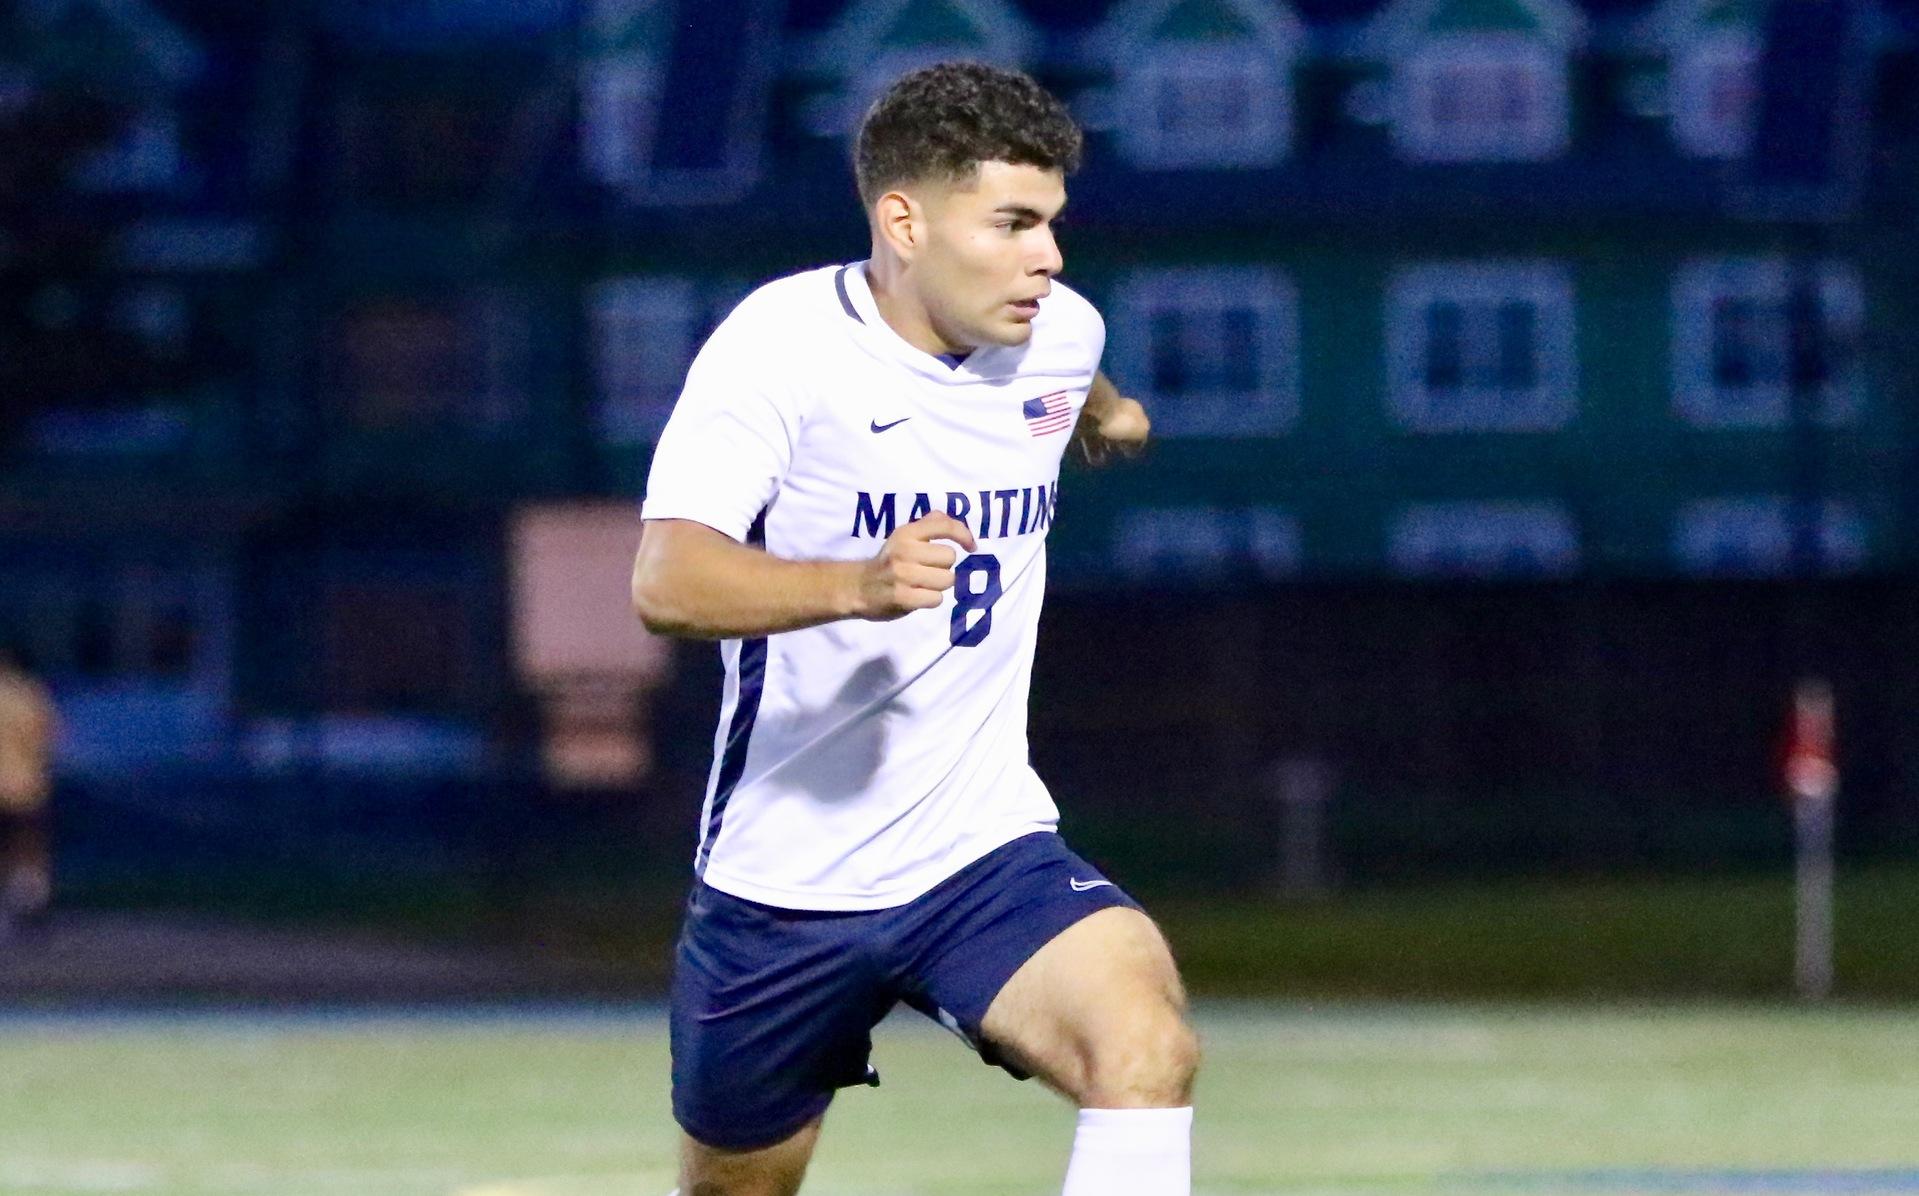 Men's Soccer: Sanchez Scores First Career Goal in Loss to Owls